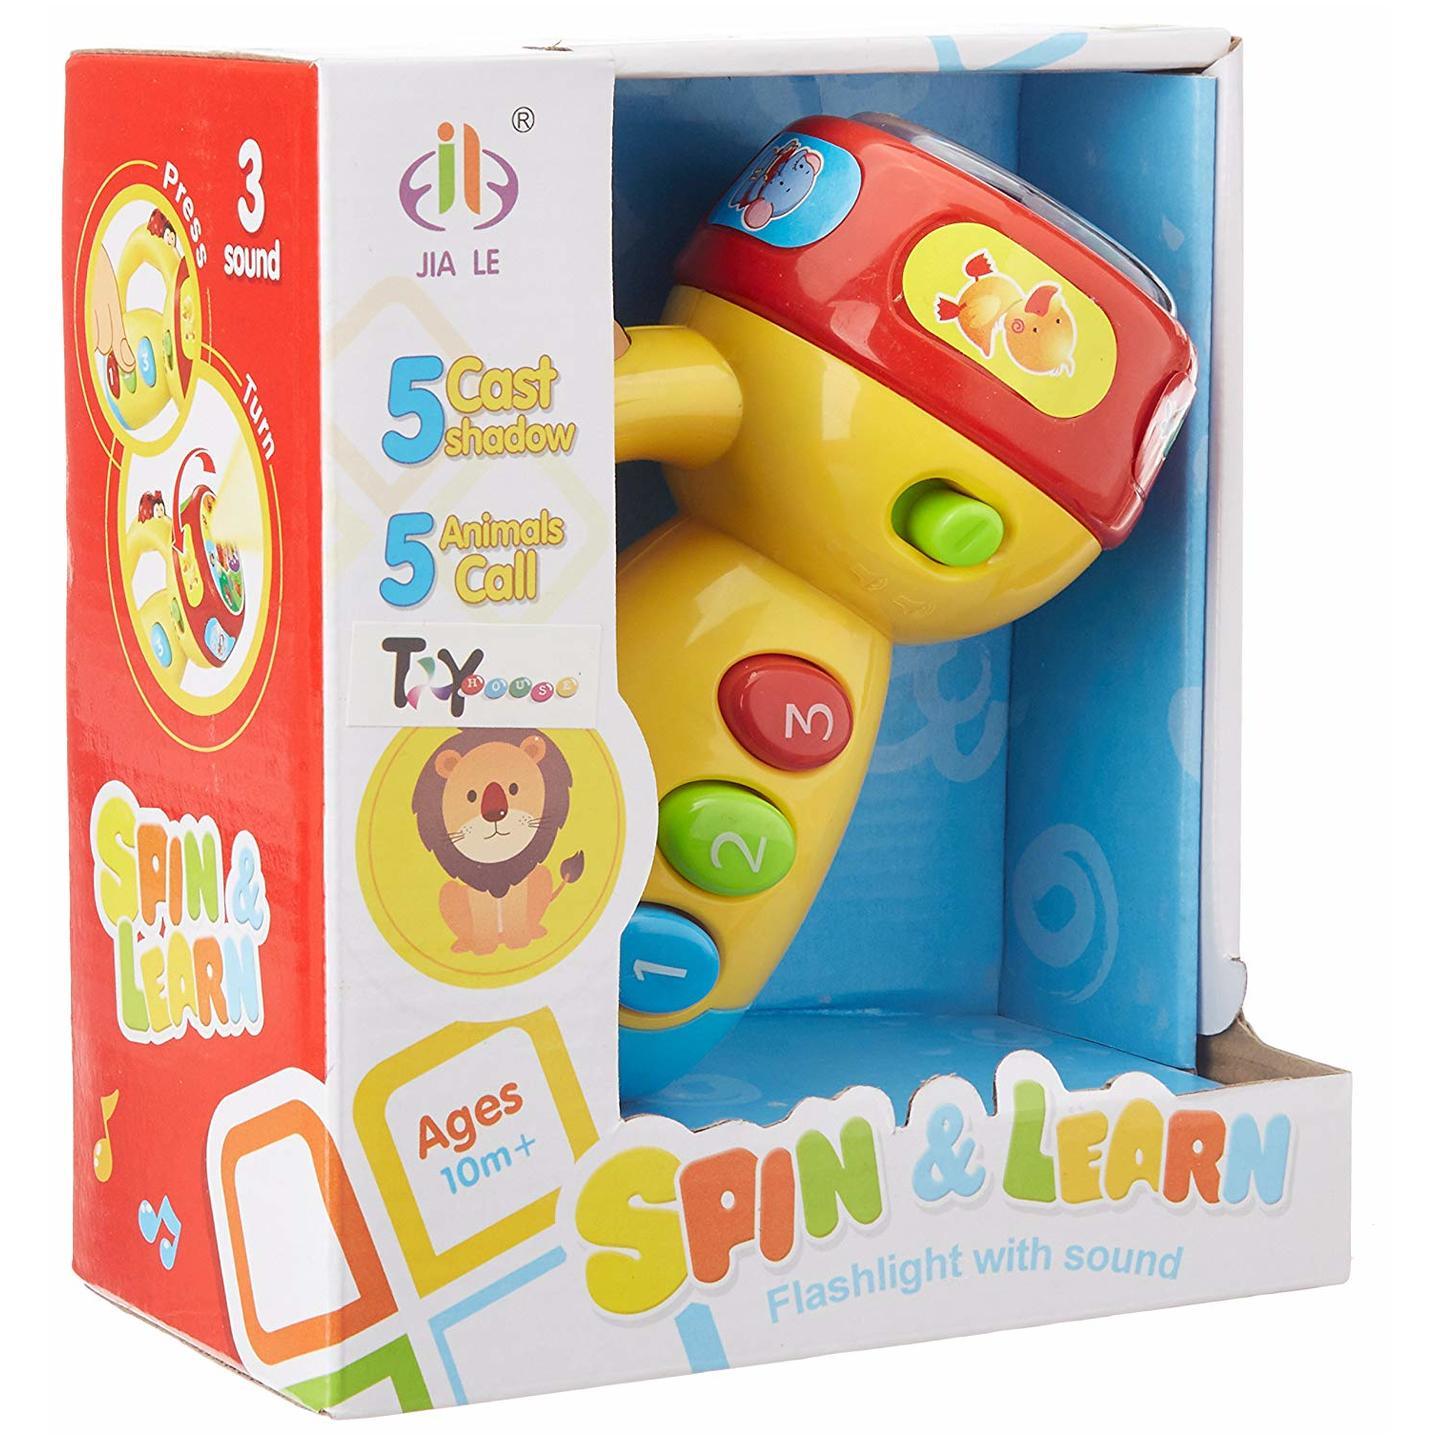 Toddler Flashlight with Music and Light